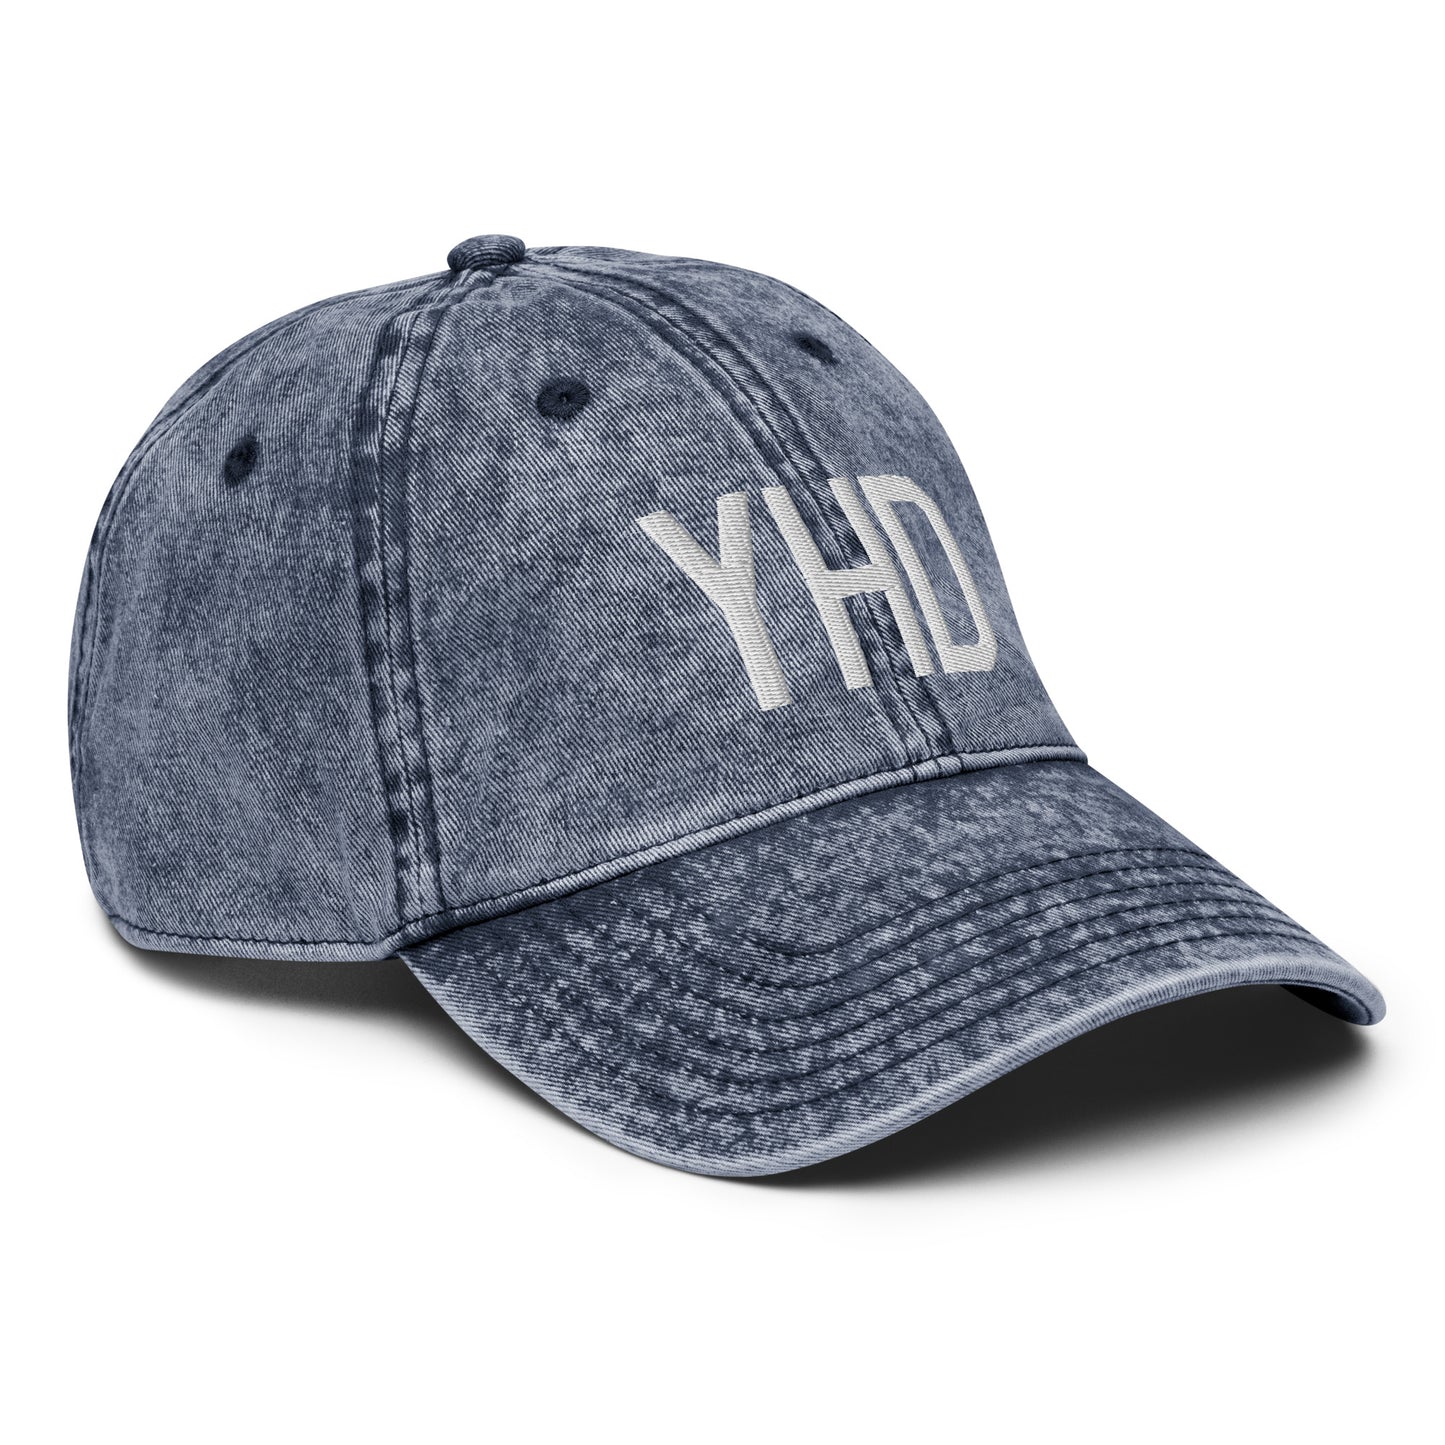 Airport Code Twill Cap - White • YHD Dryden • YHM Designs - Image 18